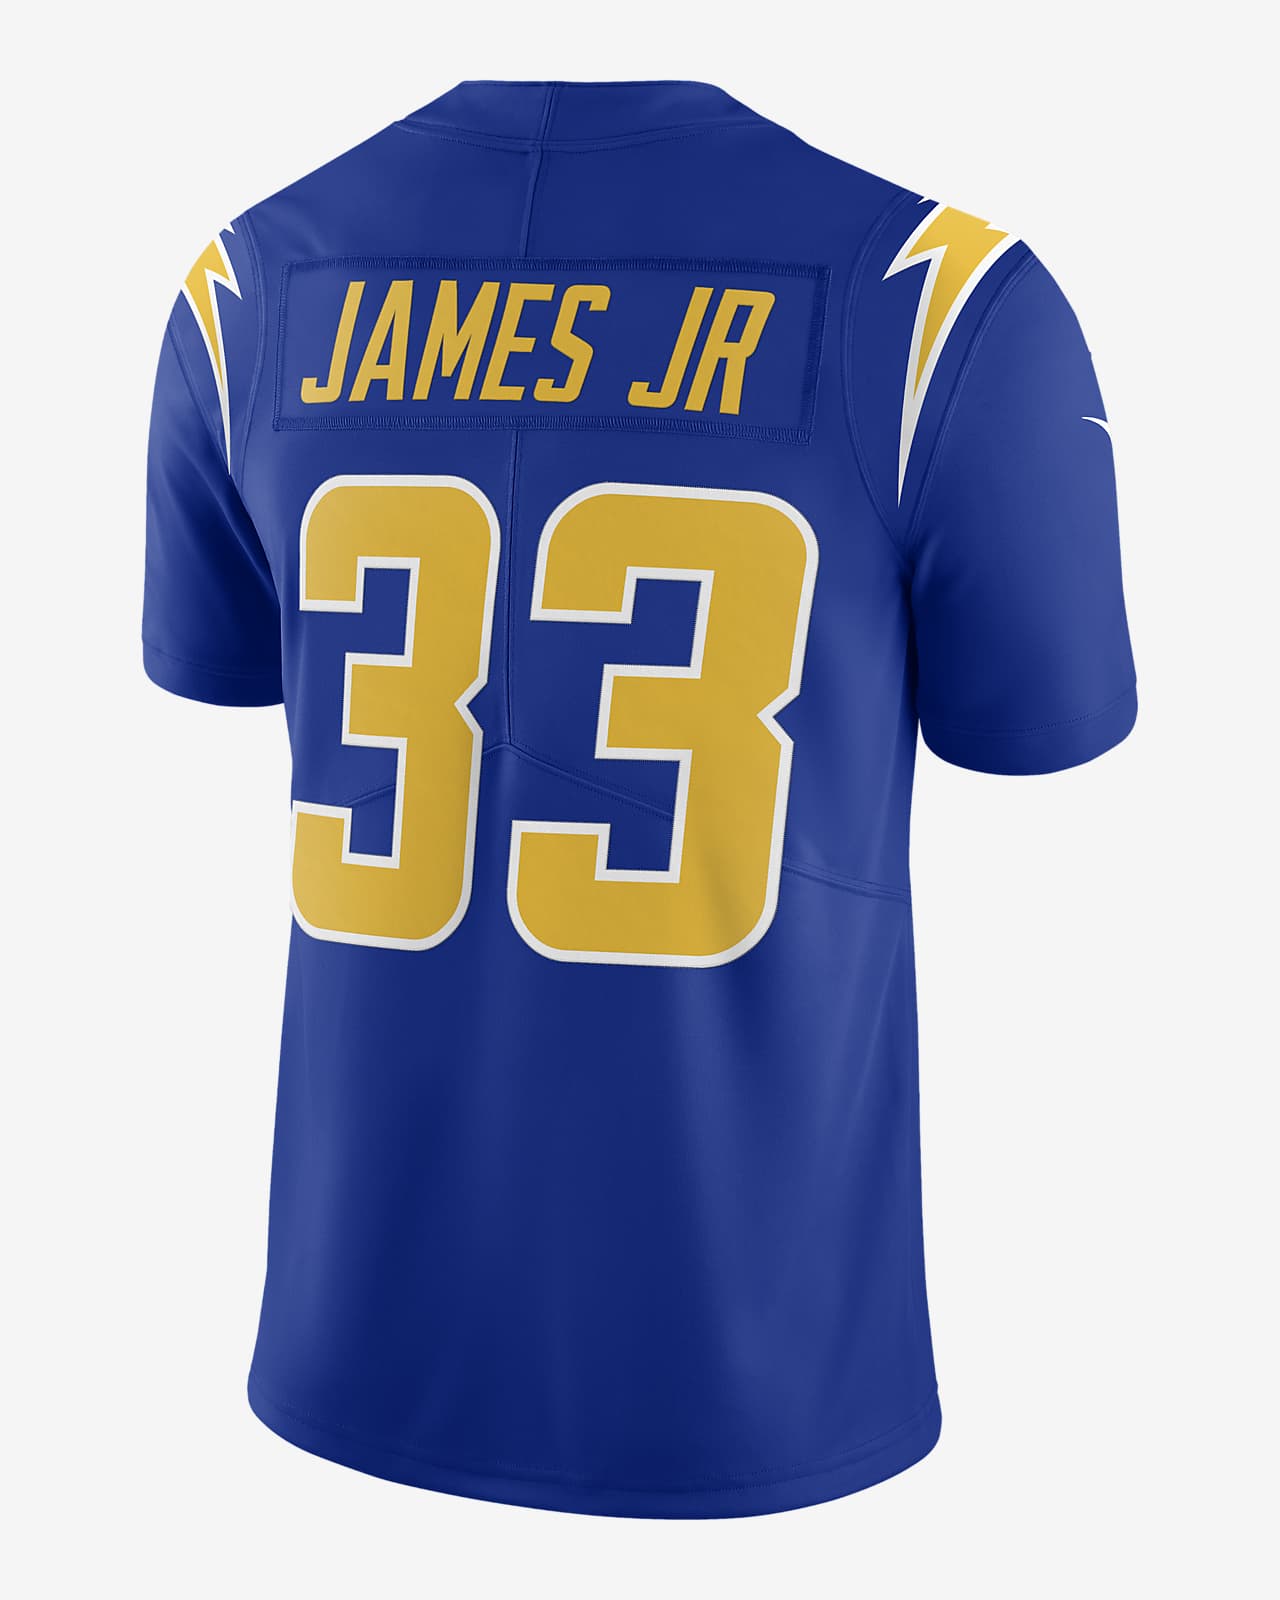 chargers nike jersey